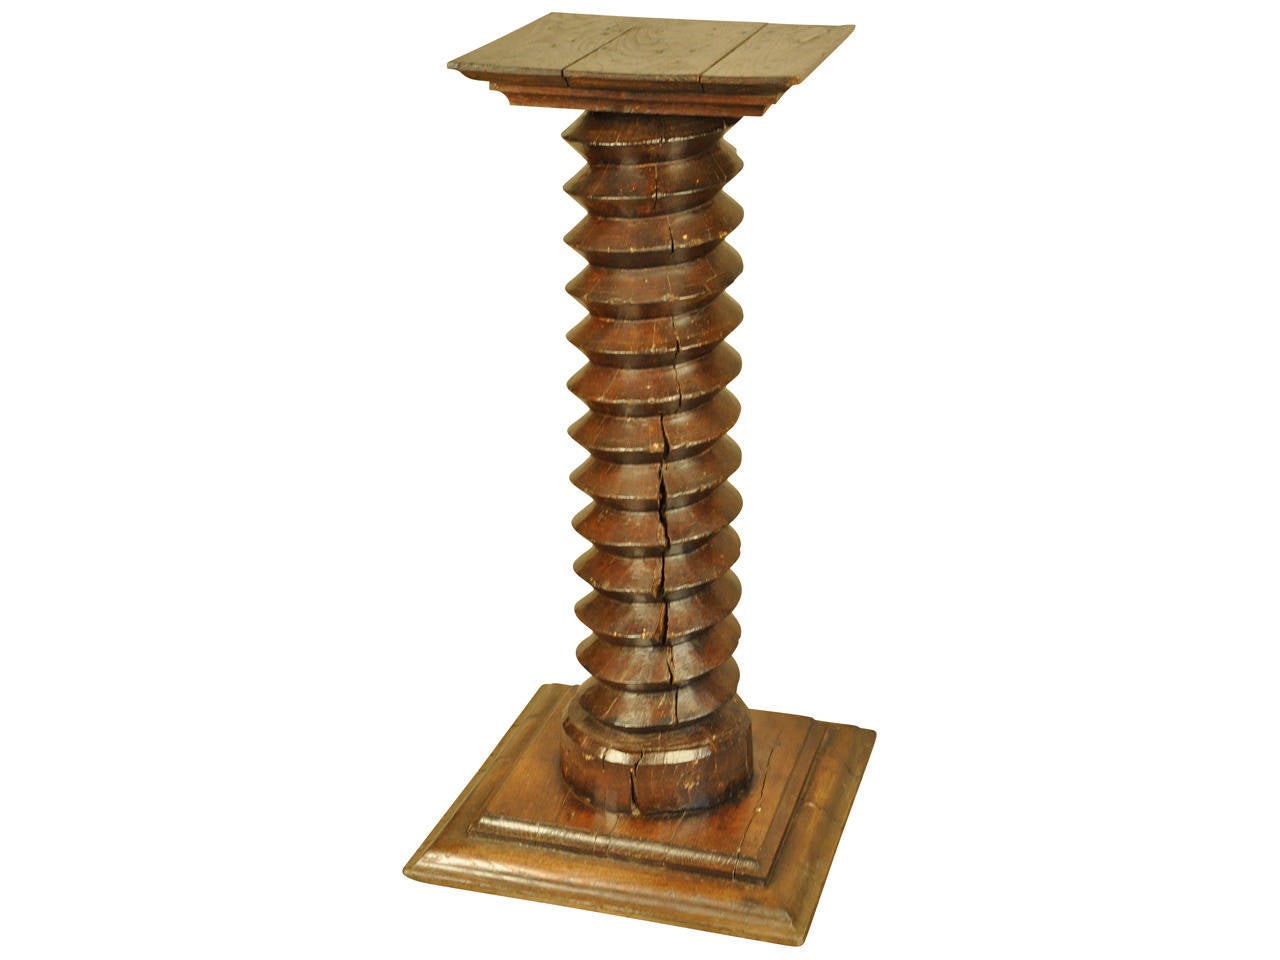 A wonderful pedestal constructed from a 19th century antique wine press screw, circa 1850.  The pedestal is made from chestnut and the patina is indeed very rich and luminous.  Perfect for the display of a sculpture or art piece.